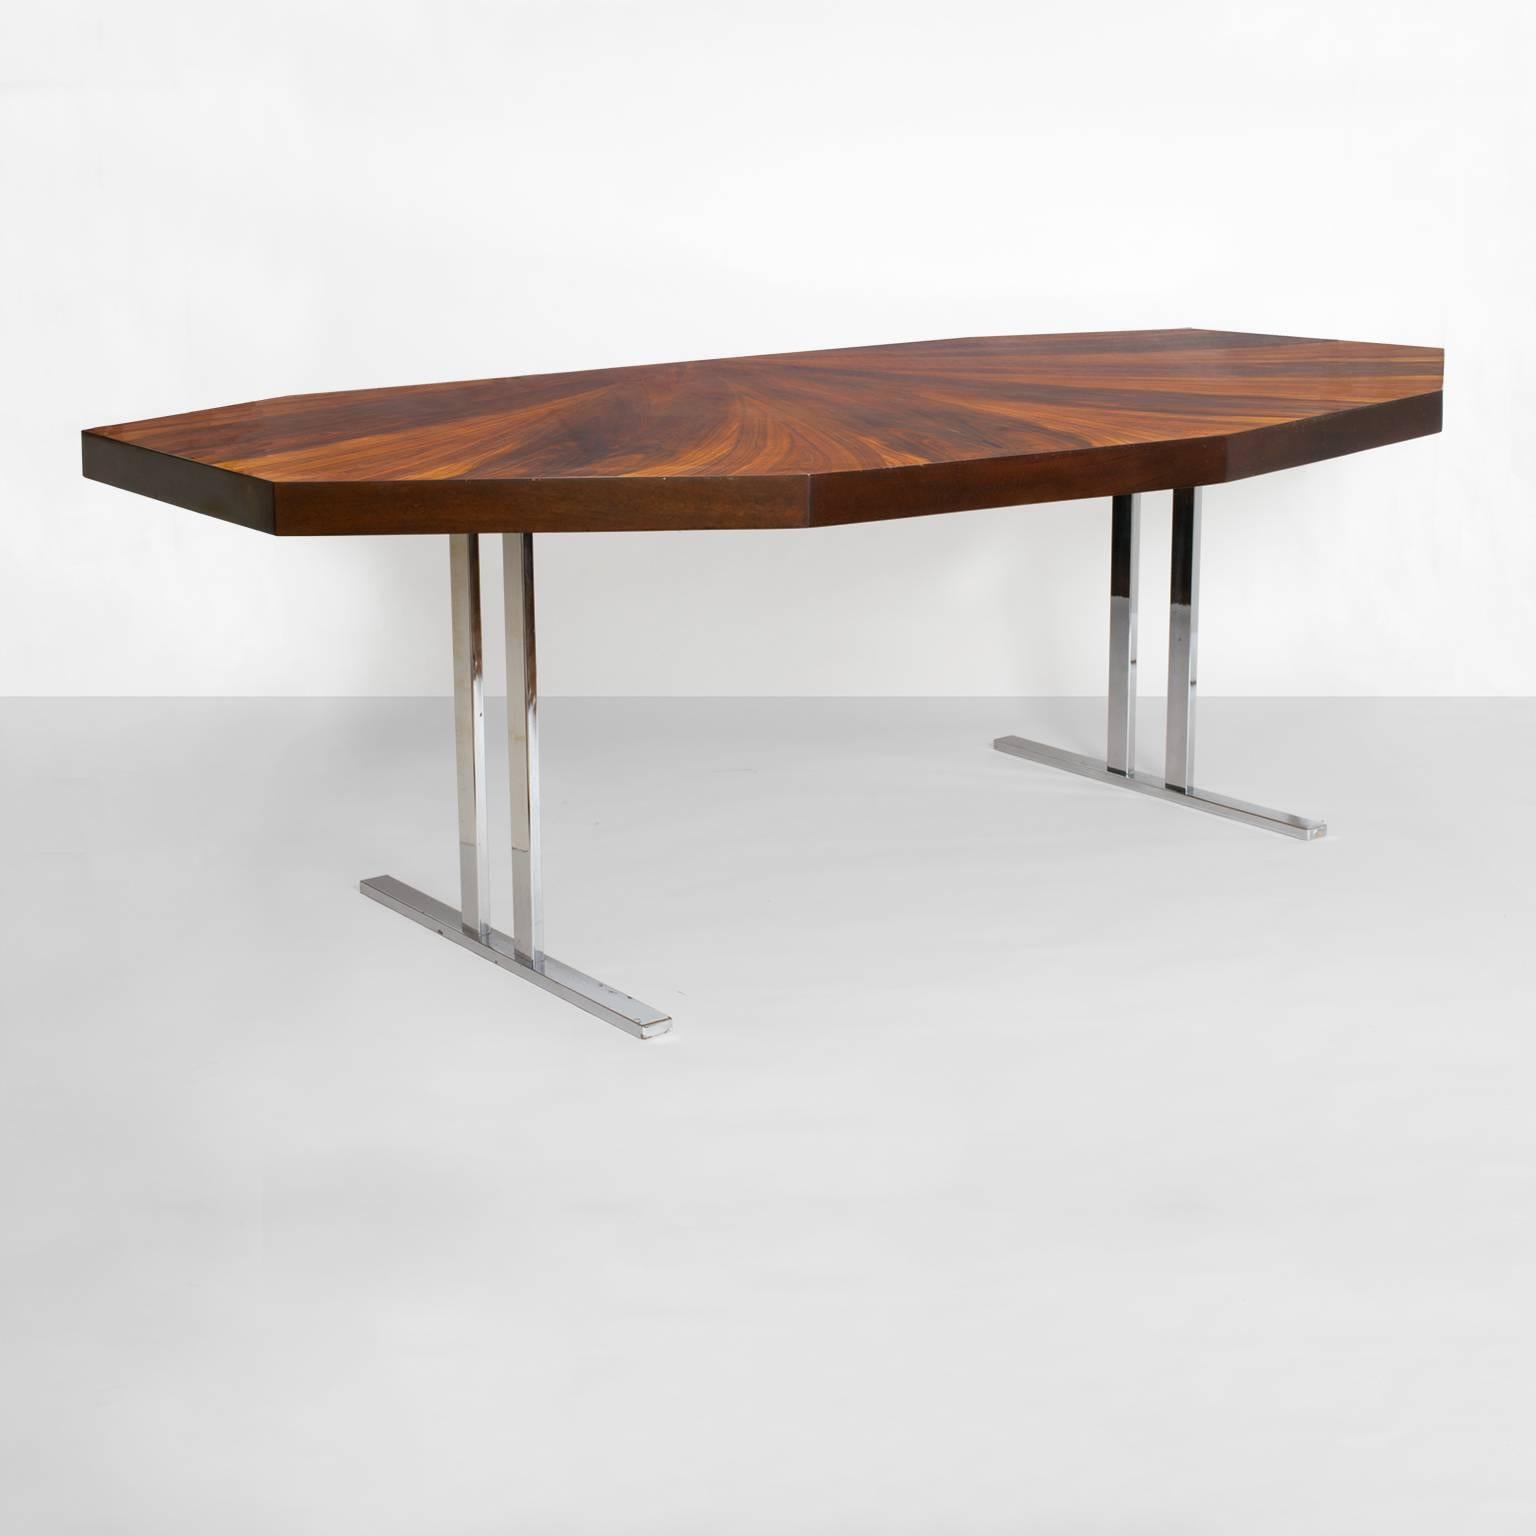 A Scandinavian Modern dining table or desk with chromed steel legs. The table has (nine) sides set at various angles and features a dramatic fan pattern in Rosewood veneer. Newly restored top in excellent condition, chrome base has some small